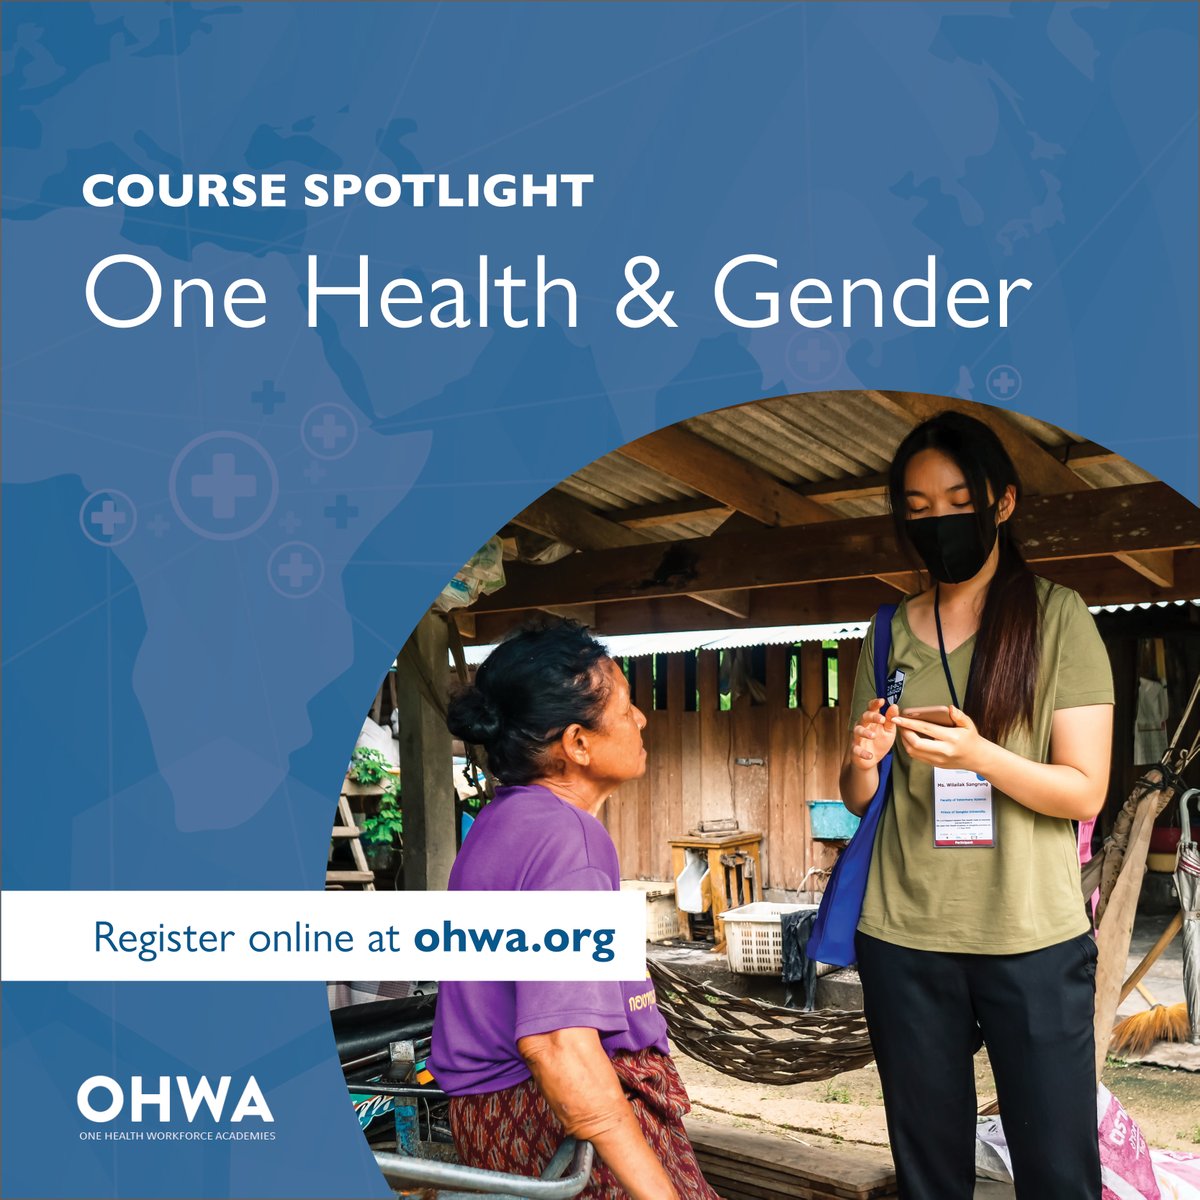 ENROLL TODAY! Another course we have available is One Health & Gender, exploring concepts such as gender and sex, and how they relate to #OneHealth. Additional topics covered: Gender Sensitive Emergency Response Planning & Risk Communication. Enroll at: ohwa.org